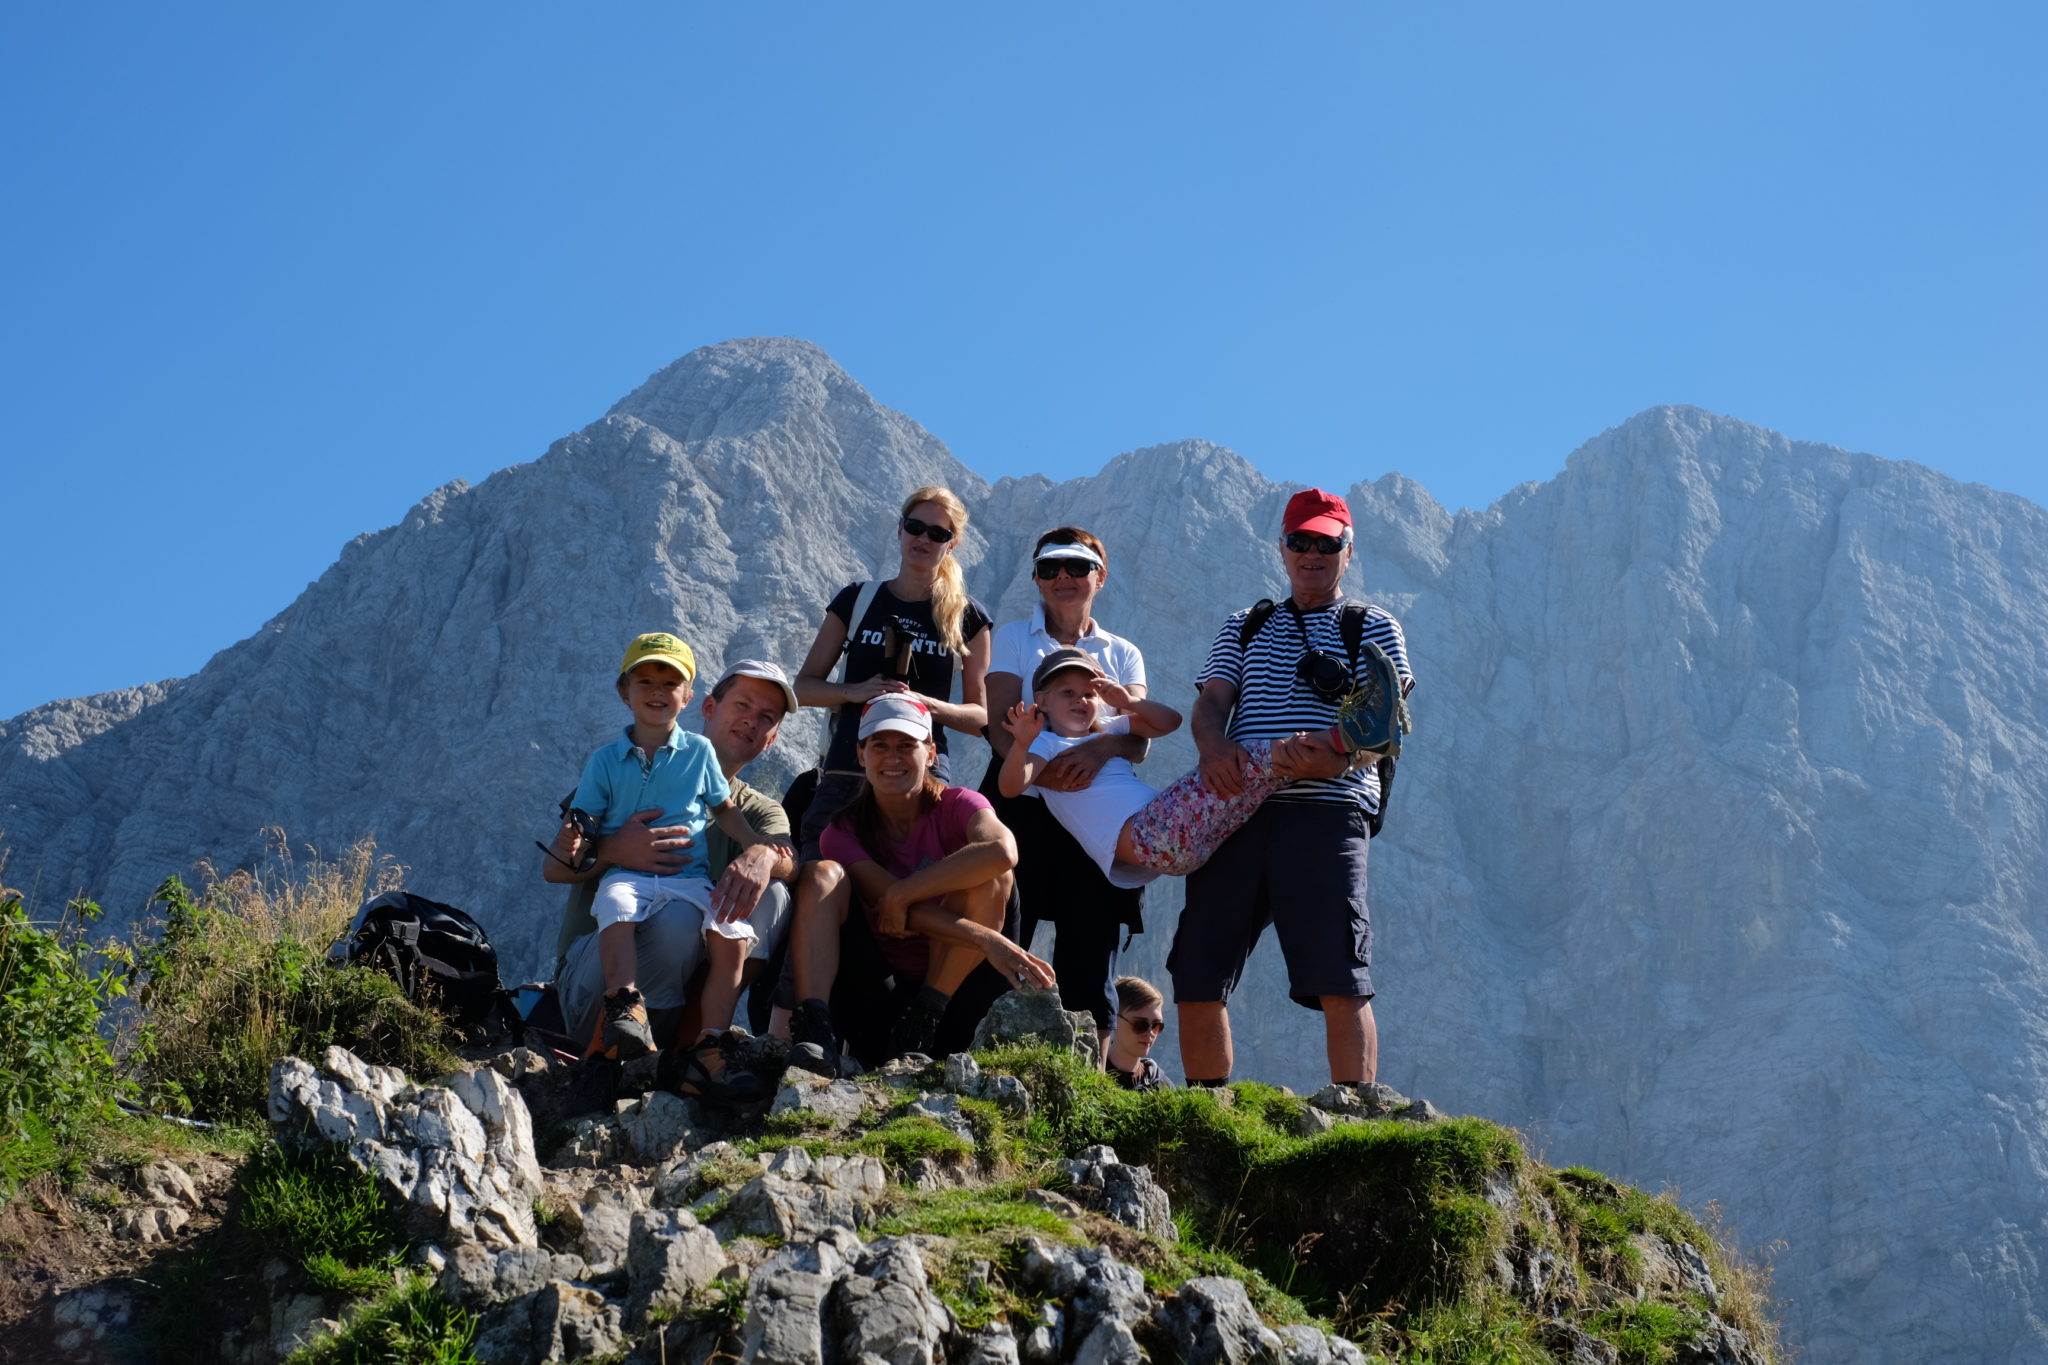 Our family at the top of Slemenova špica, 6,270 ft or 1,911 m. This one will look good in our calendar!